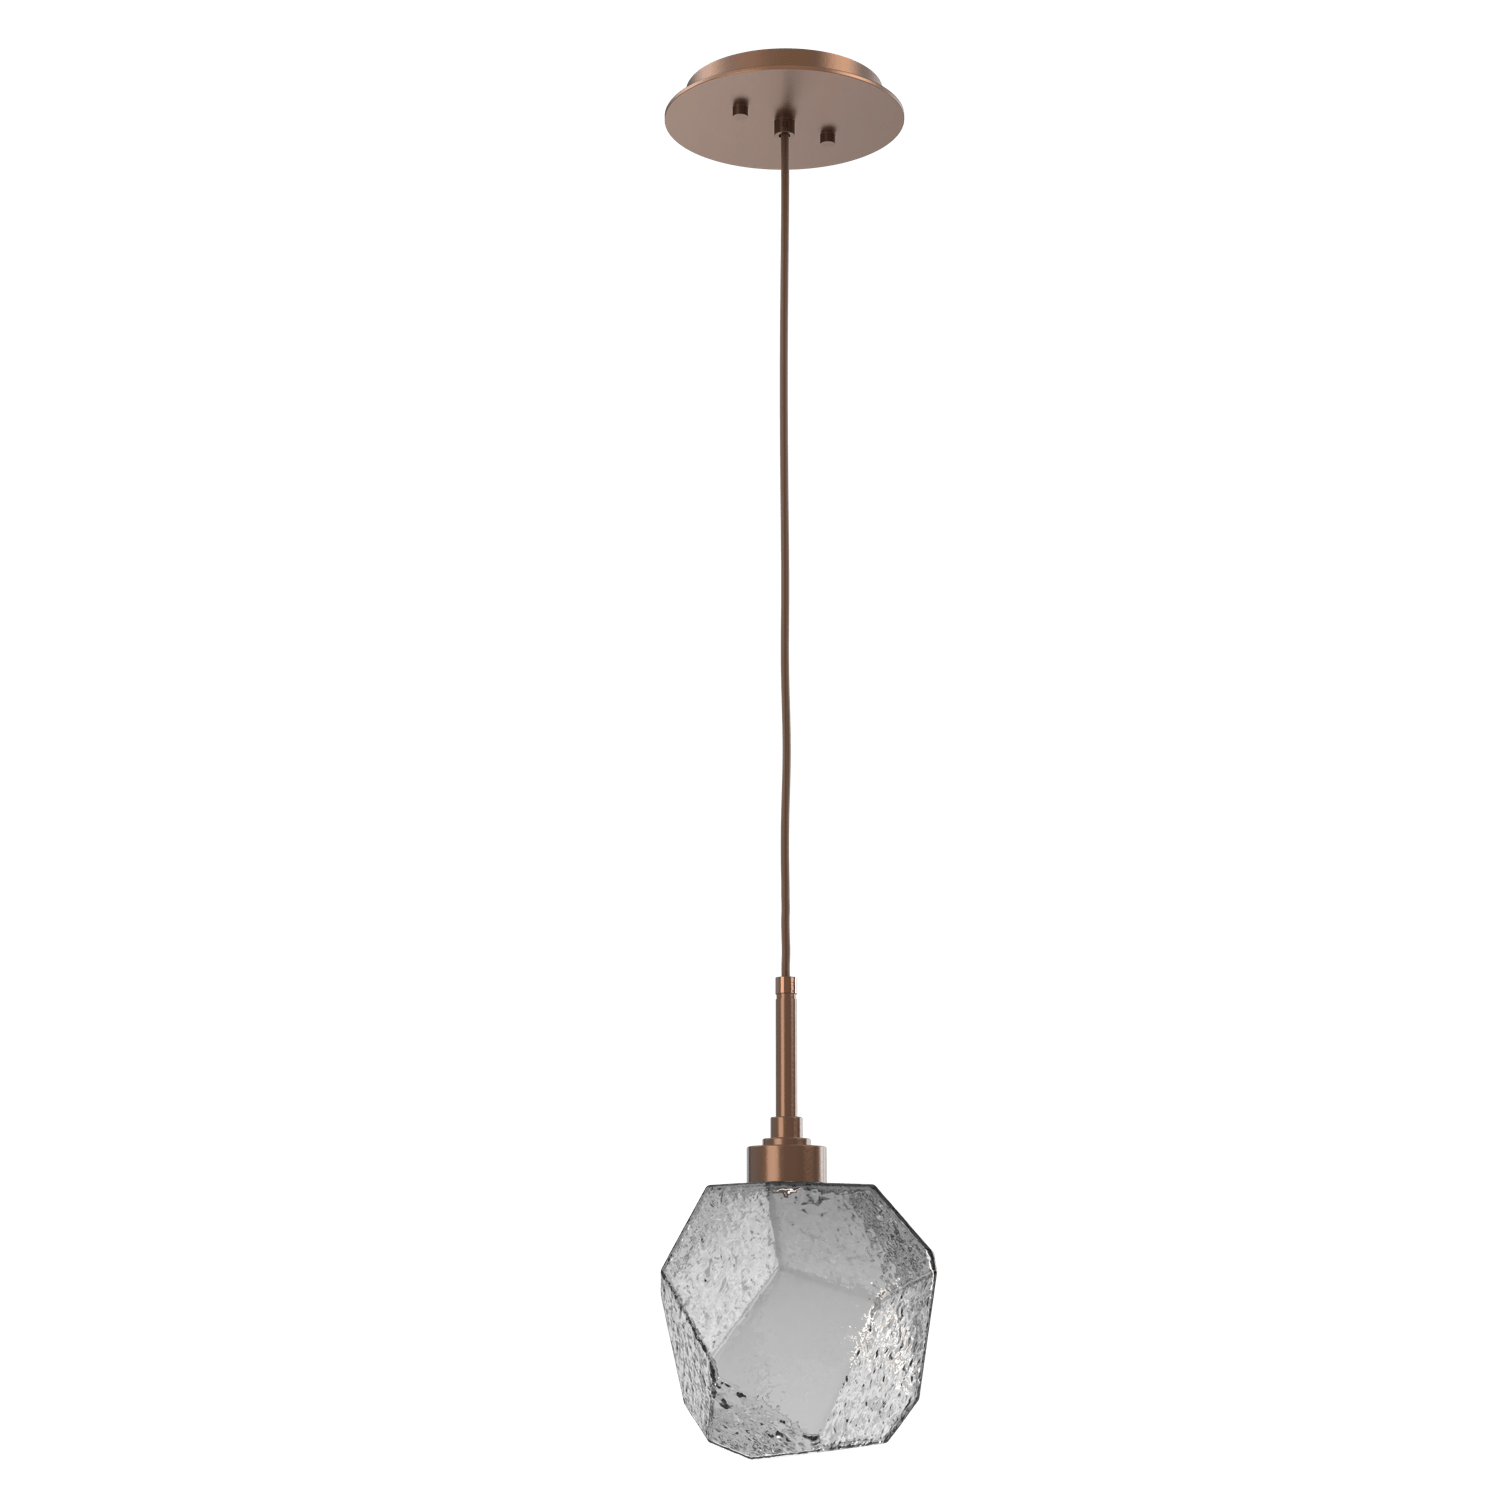 LAB0039-01-BB-S-Hammerton-Studio-Gem-pendant-light-with-burnished-bronze-finish-and-smoke-blown-glass-shades-and-LED-lamping